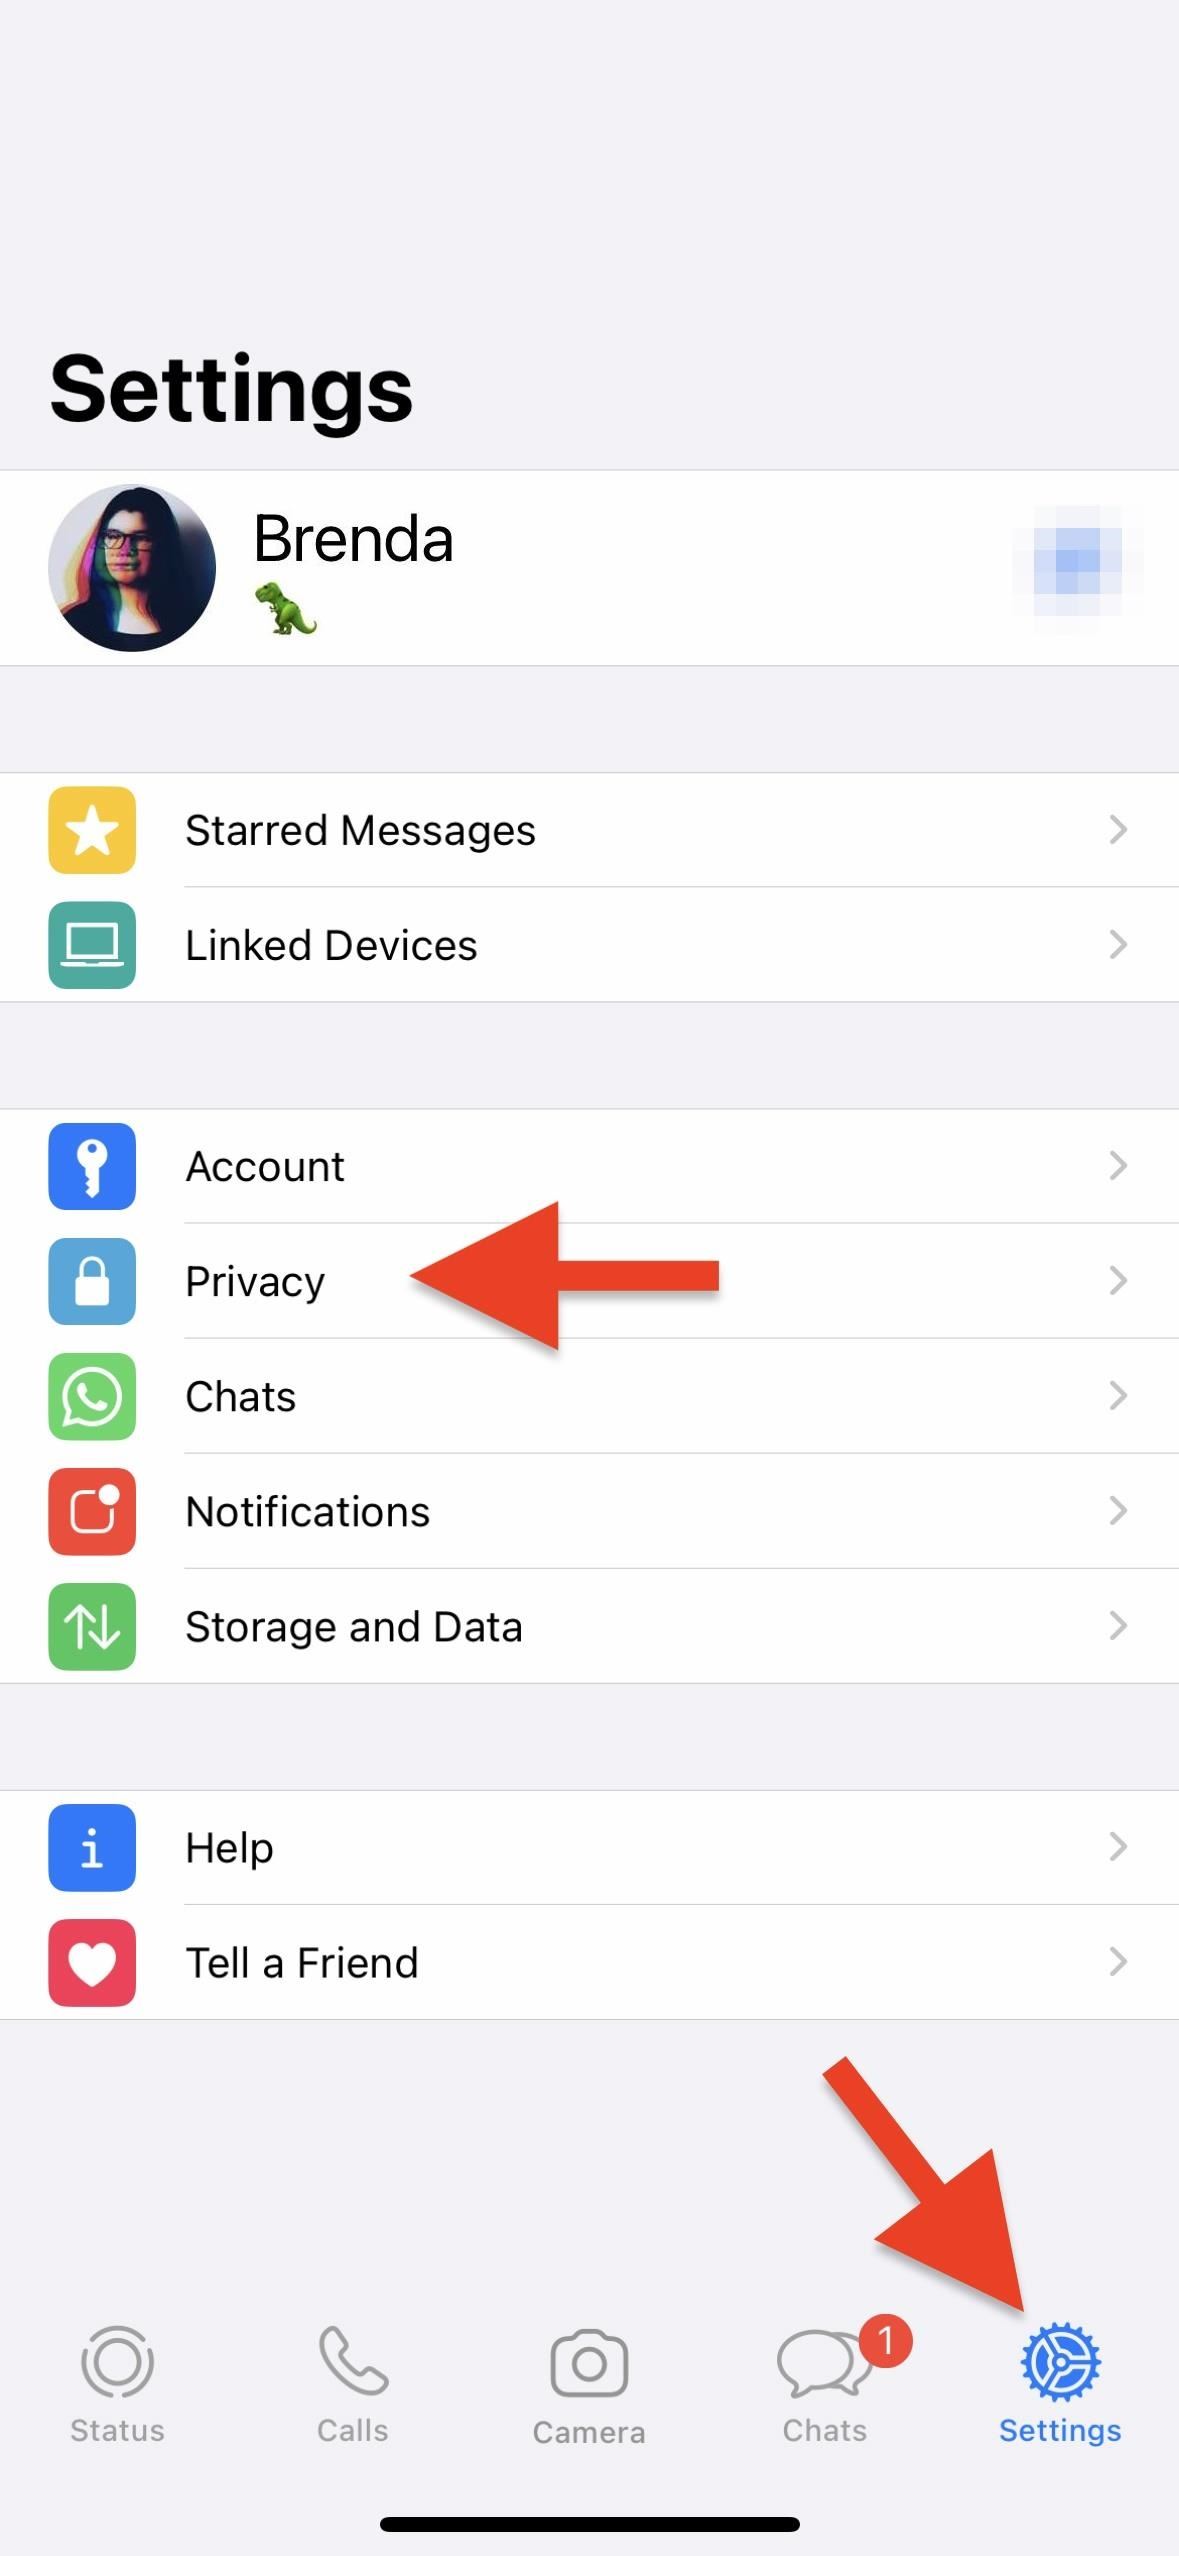 Hide Your WhatsApp Online and Last Seen Statuses from Everyone or Just Some of Your Contacts